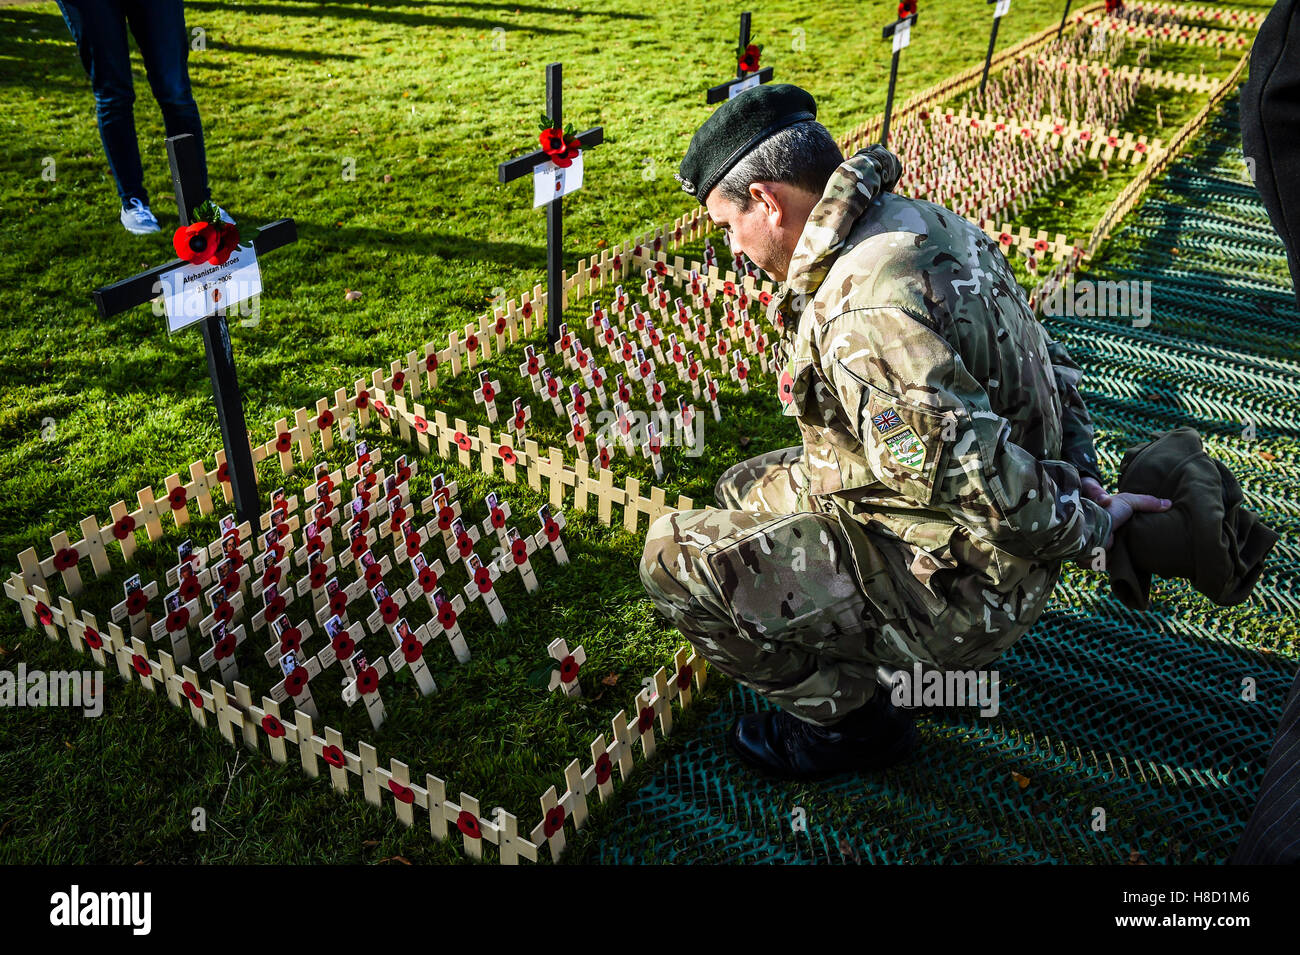 A serviceman inspects poppies on crosses during a service for the opening of the Field of Remembrance at Royal Wootton Bassett, near Swindon. Stock Photo